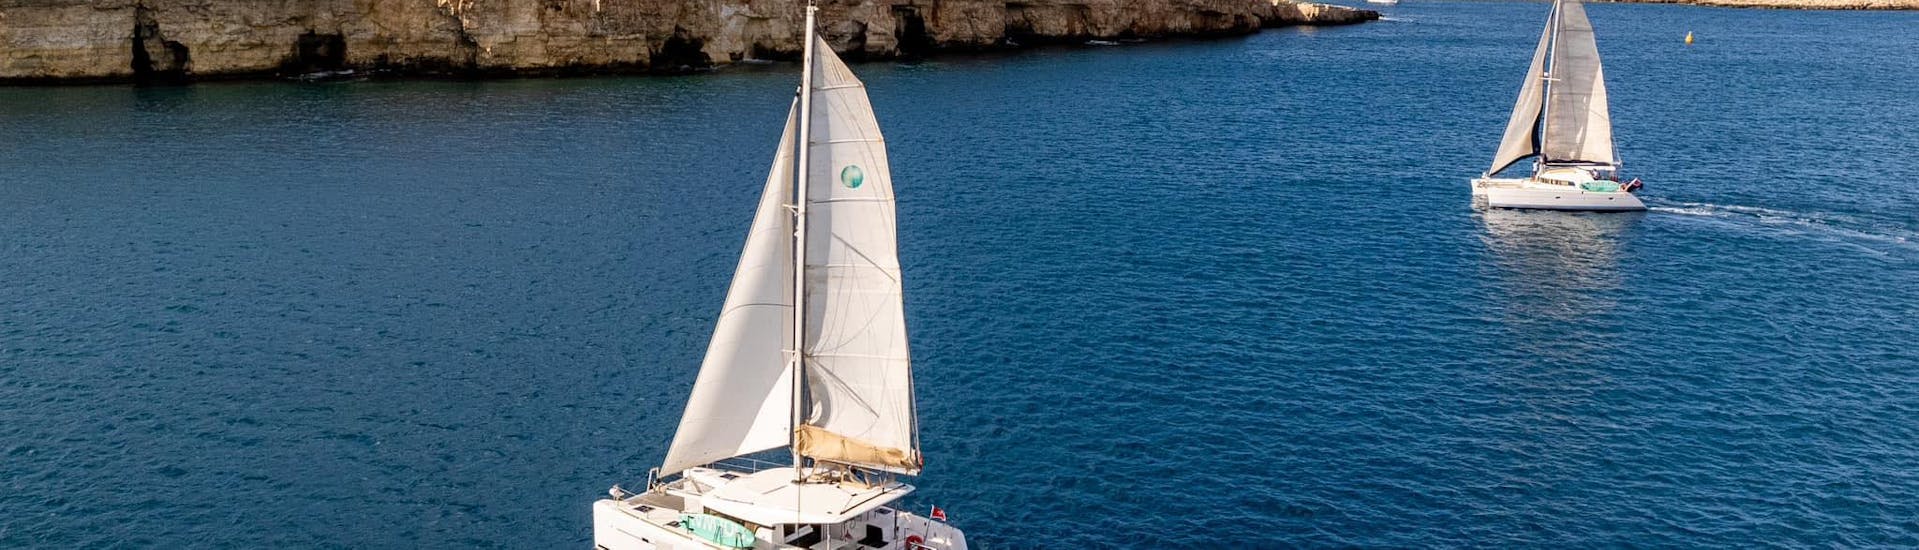 The Charters of Suncat Malta Charters in the beautiful waters of Malta.